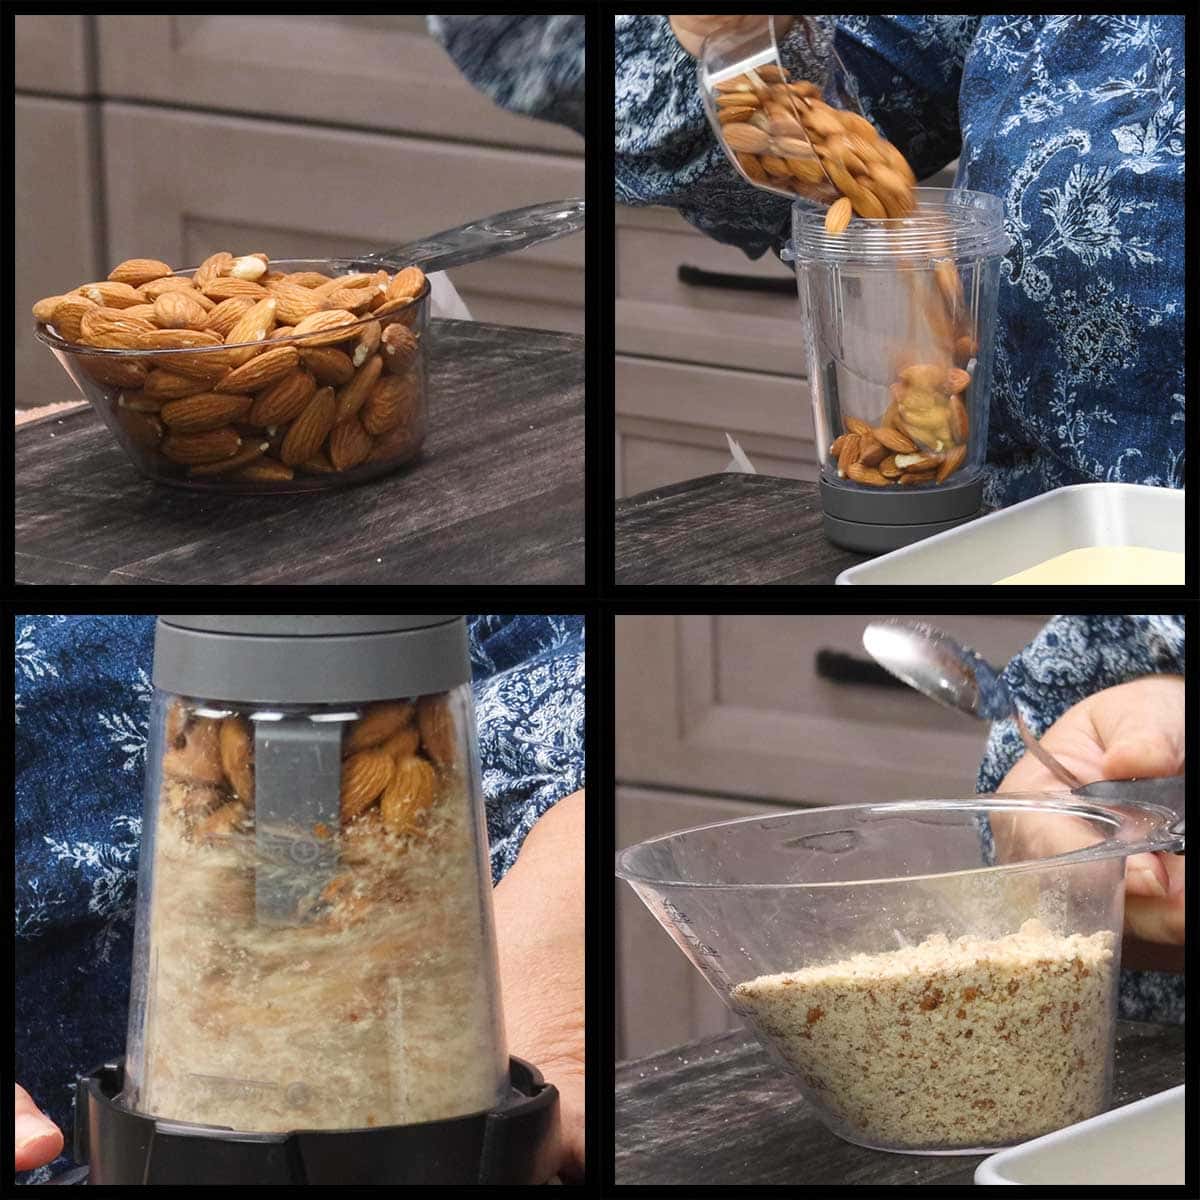 using blender cup to process almonds for chicken coating.